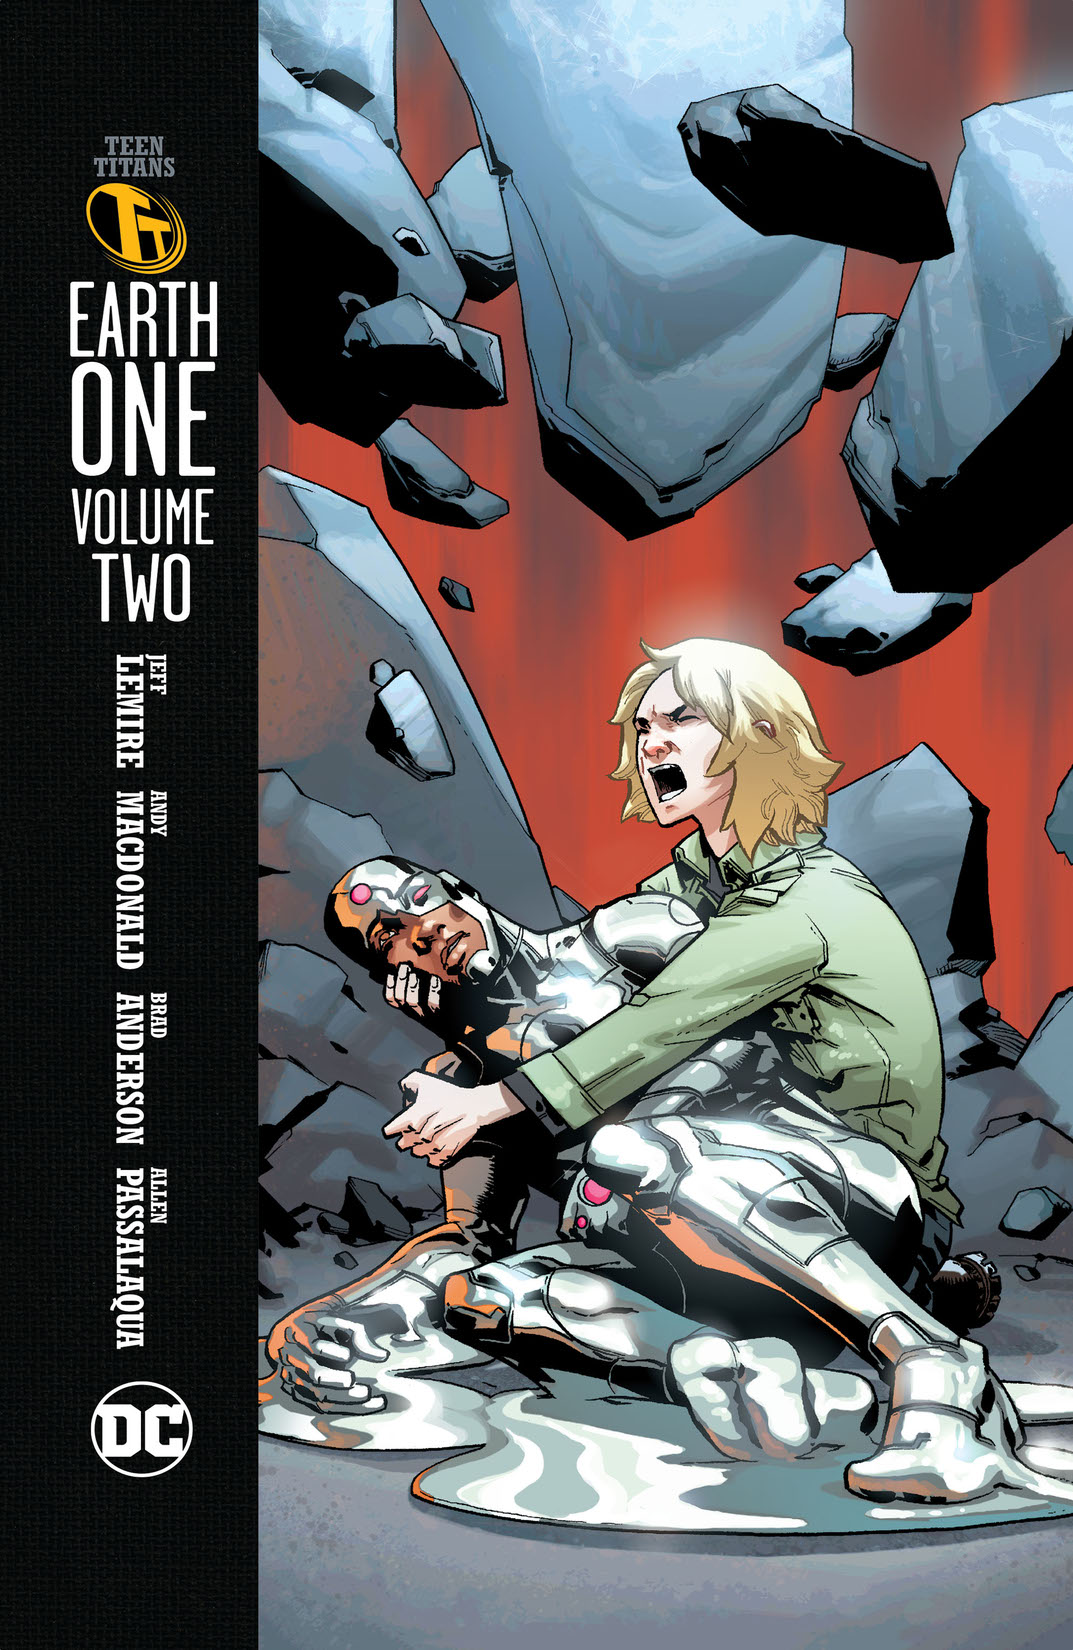 Teen Titans: Earth One Vol. 2 preview images